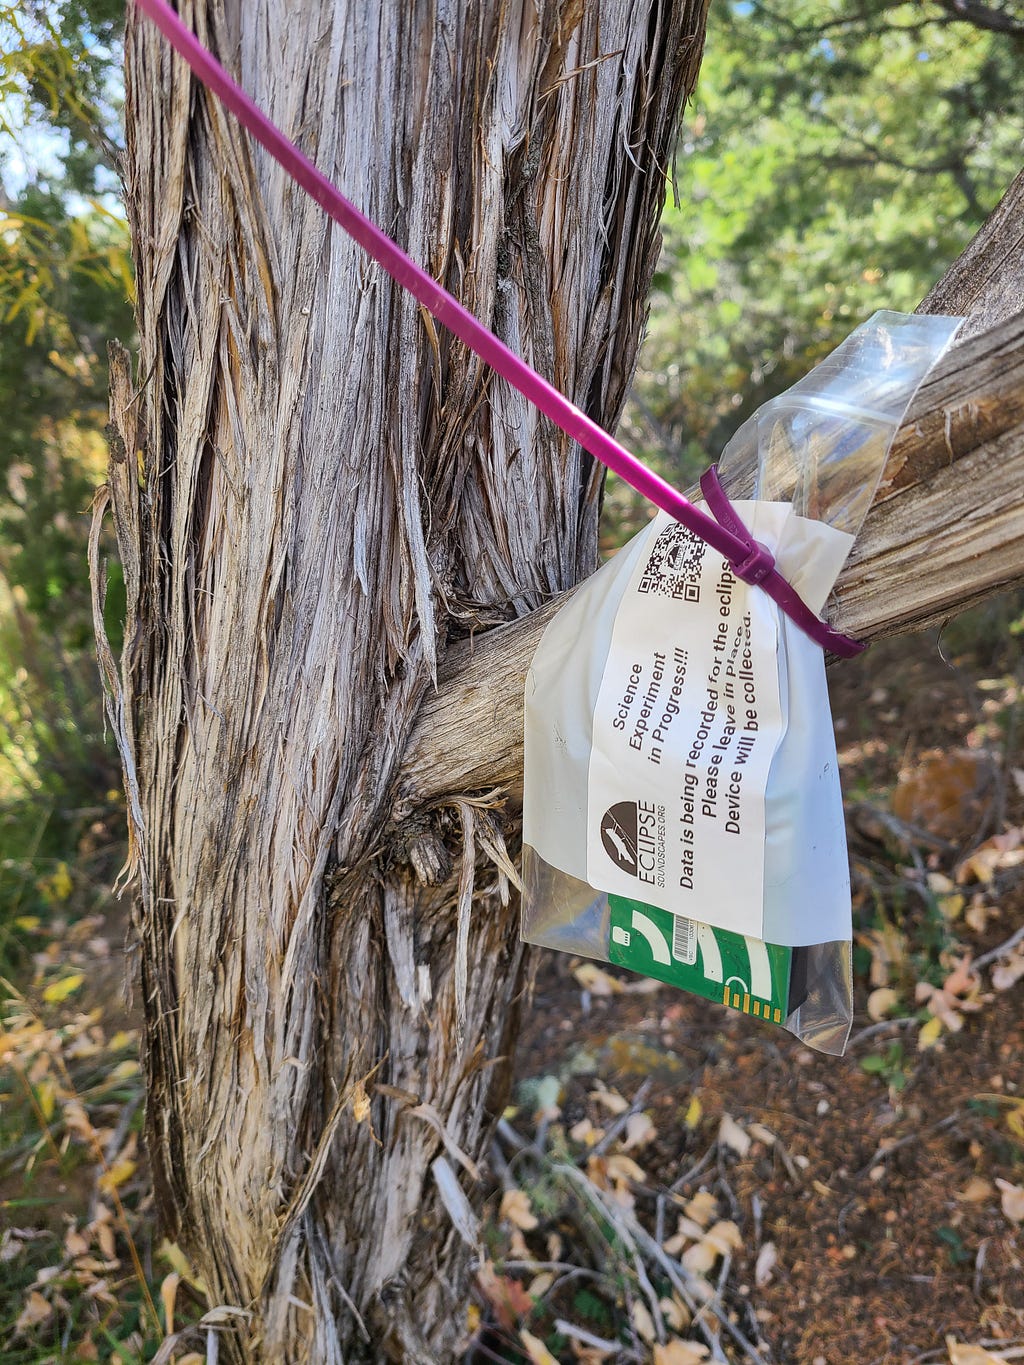 An AudioMoth recording device in a plastic bag secured to a tree.